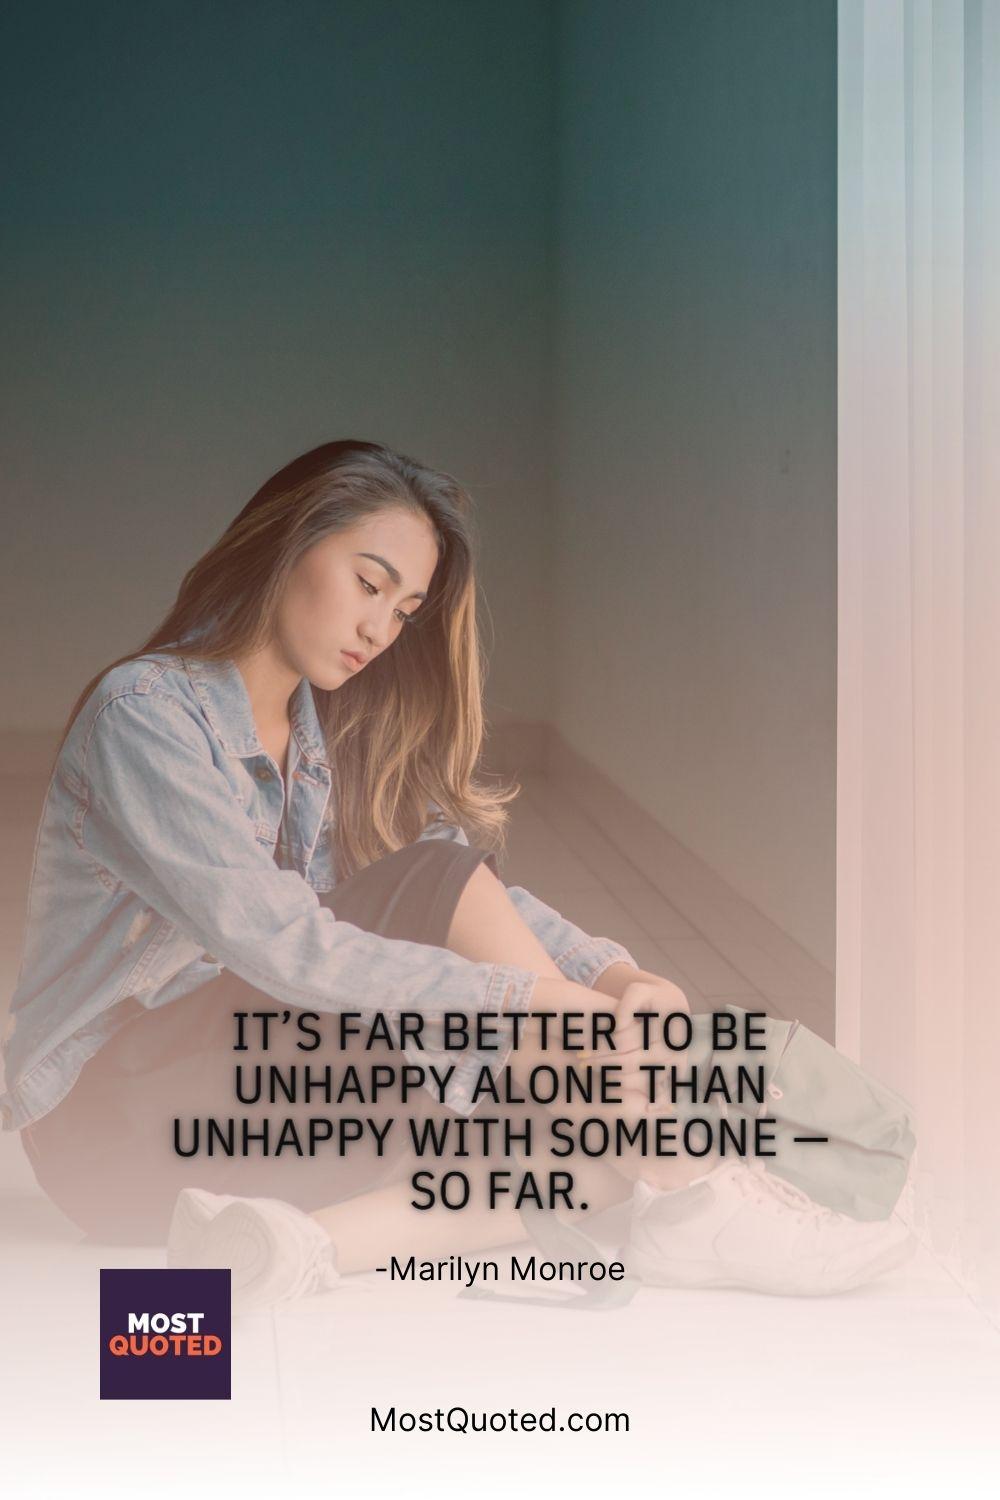 It’s far better to be unhappy alone than unhappy with someone — so far. - Marilyn Monroe